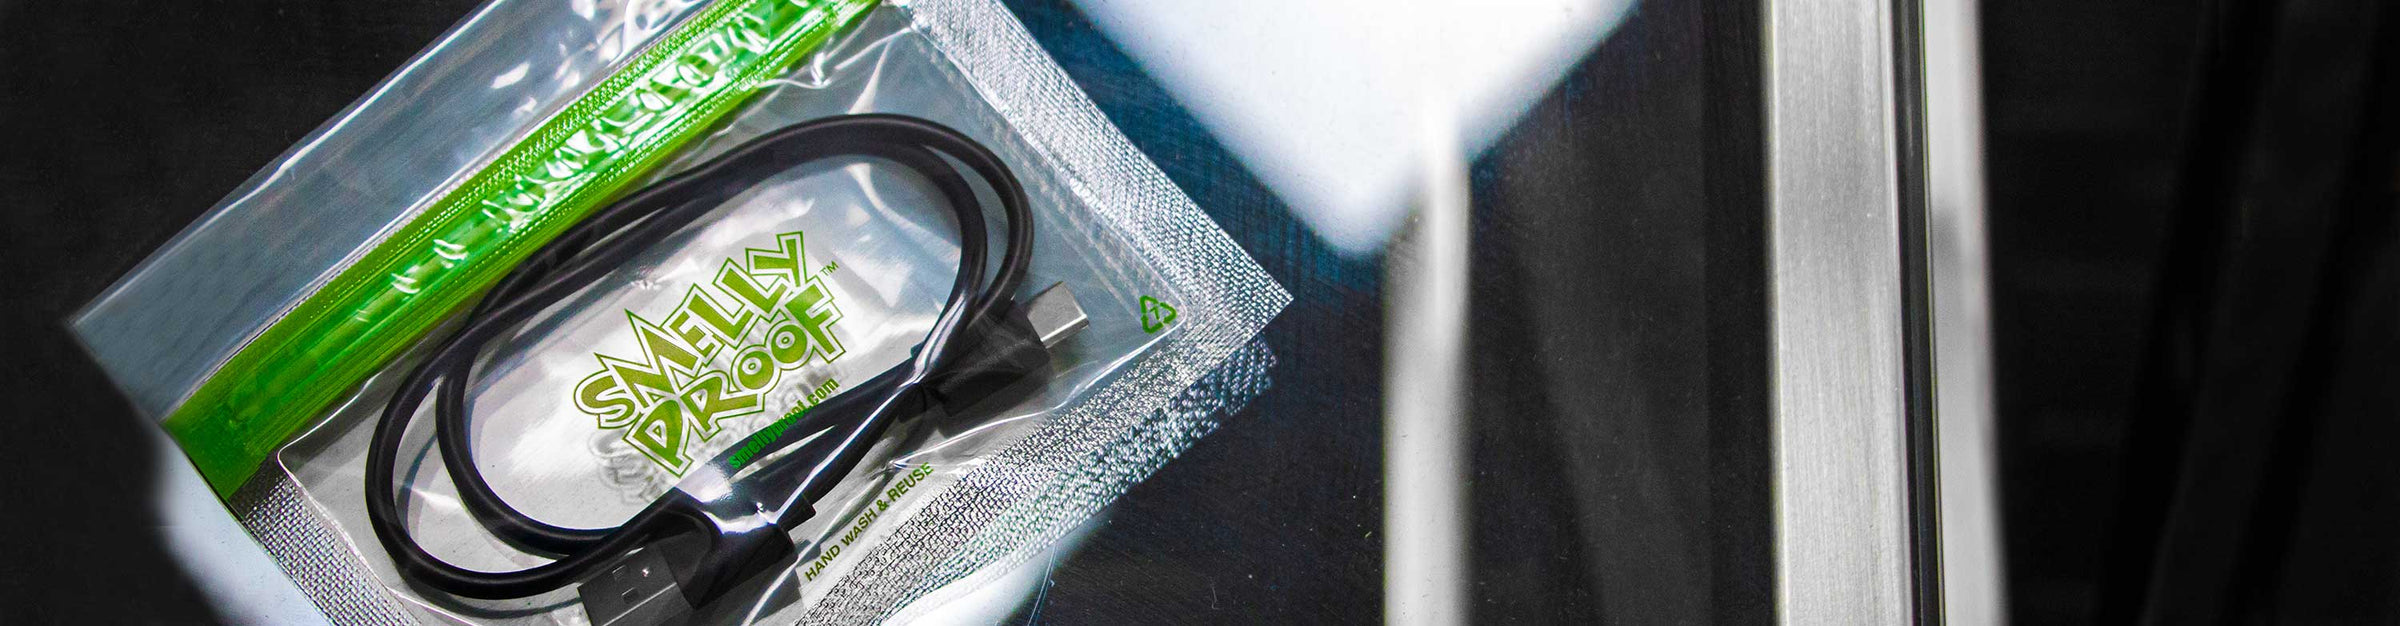 Small Sized Smelly Proof bag with USB Cable inside laying on glass table in normal lighting